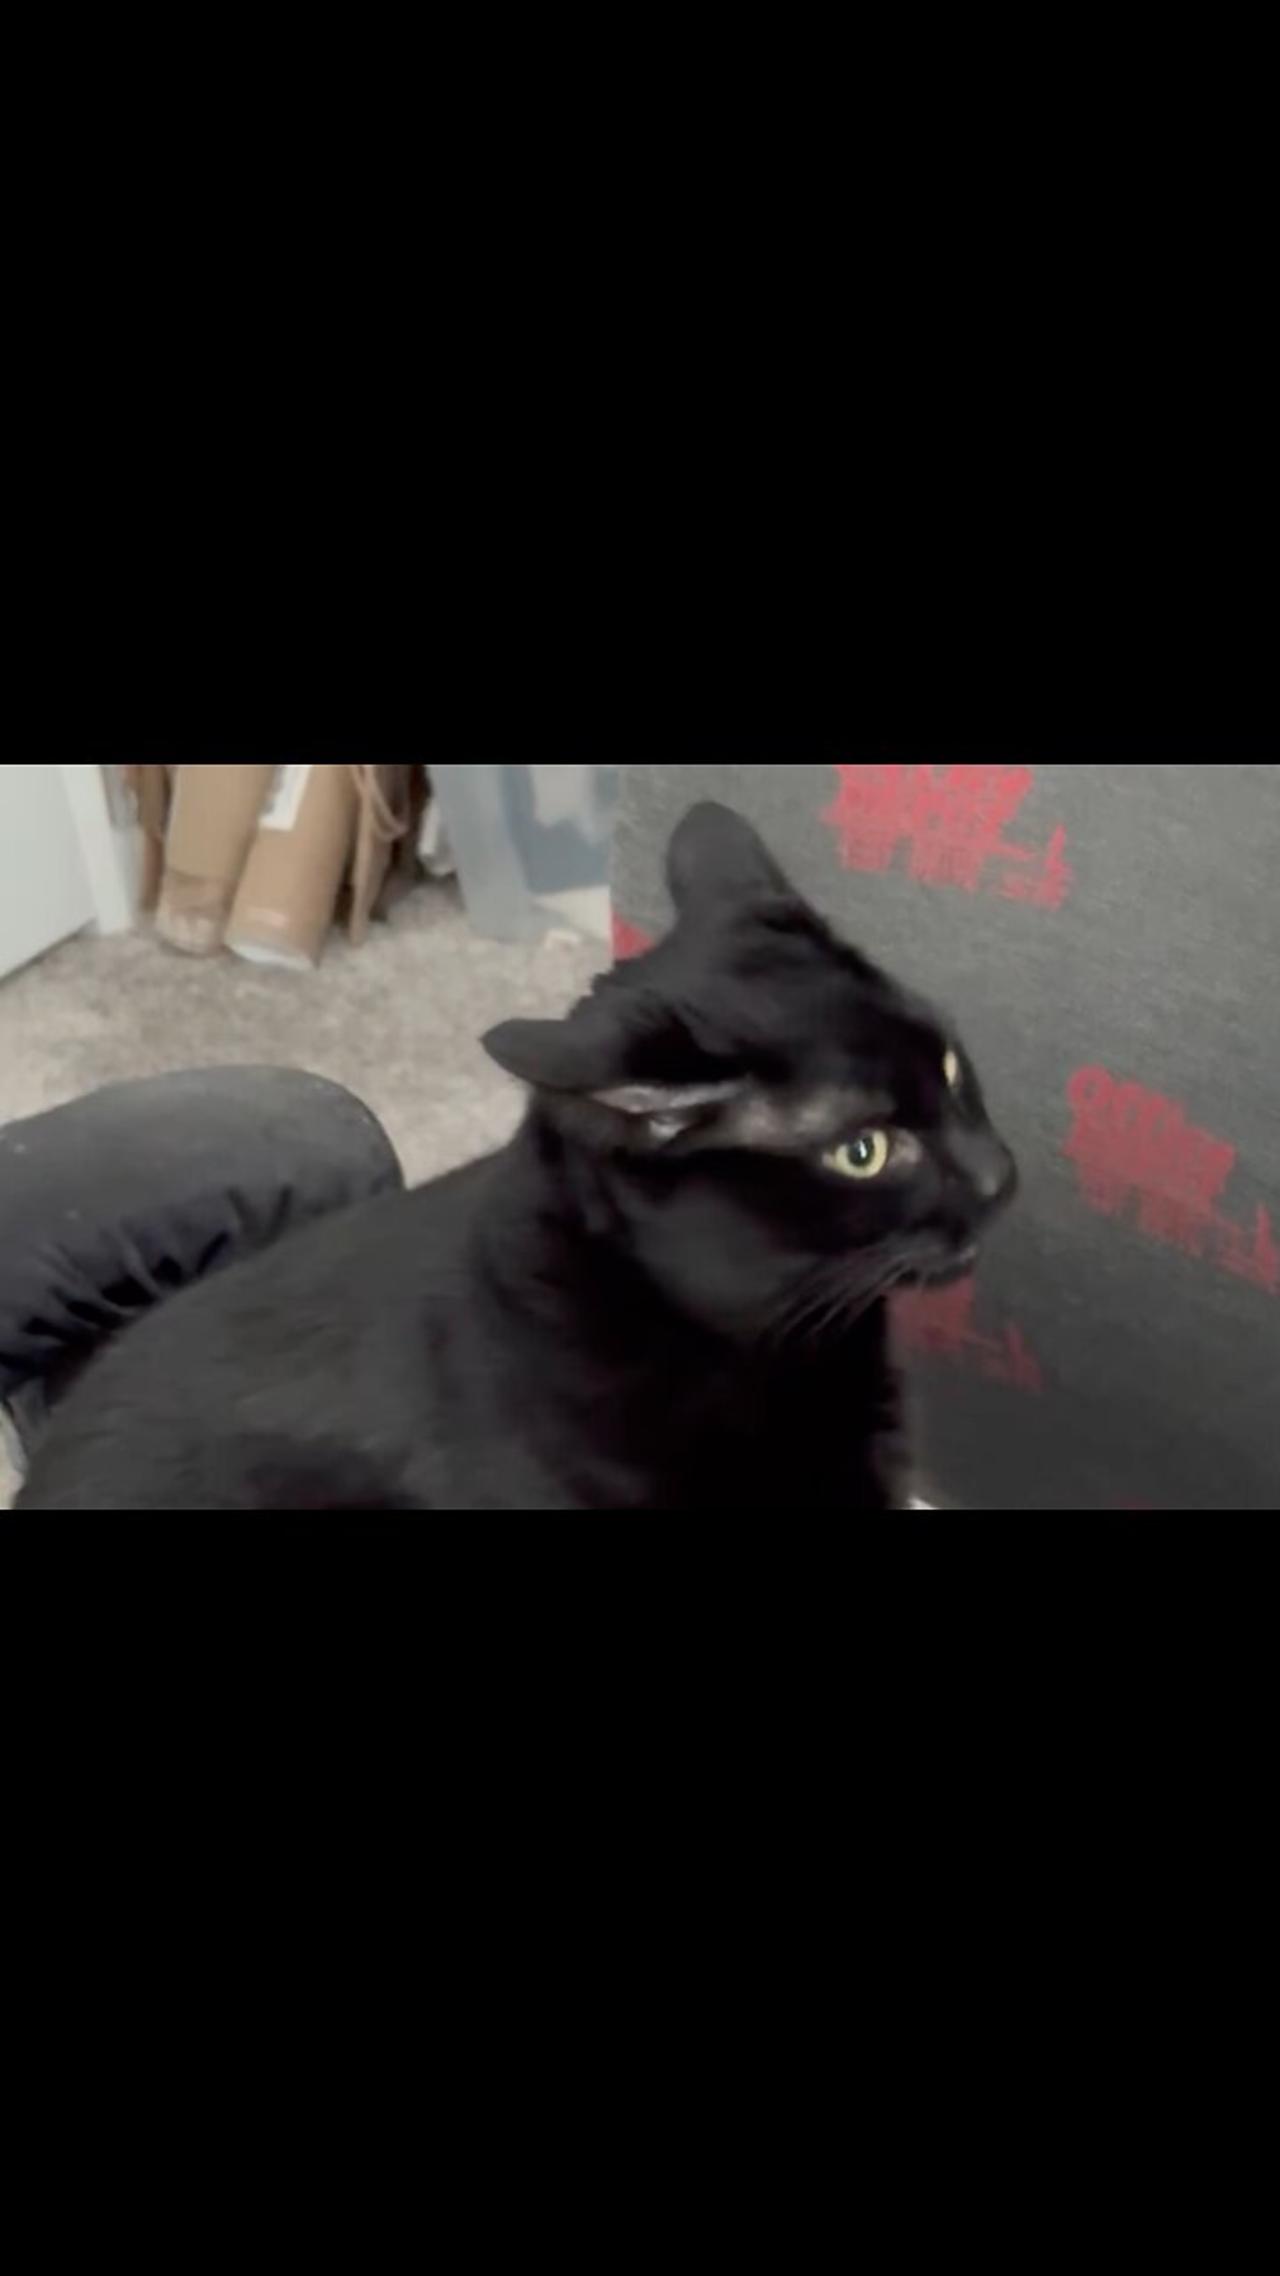 Adopting a Cat from a Shelter Vlog - Cute Precious Piper Inspects the Area Around Her Chair #shorts